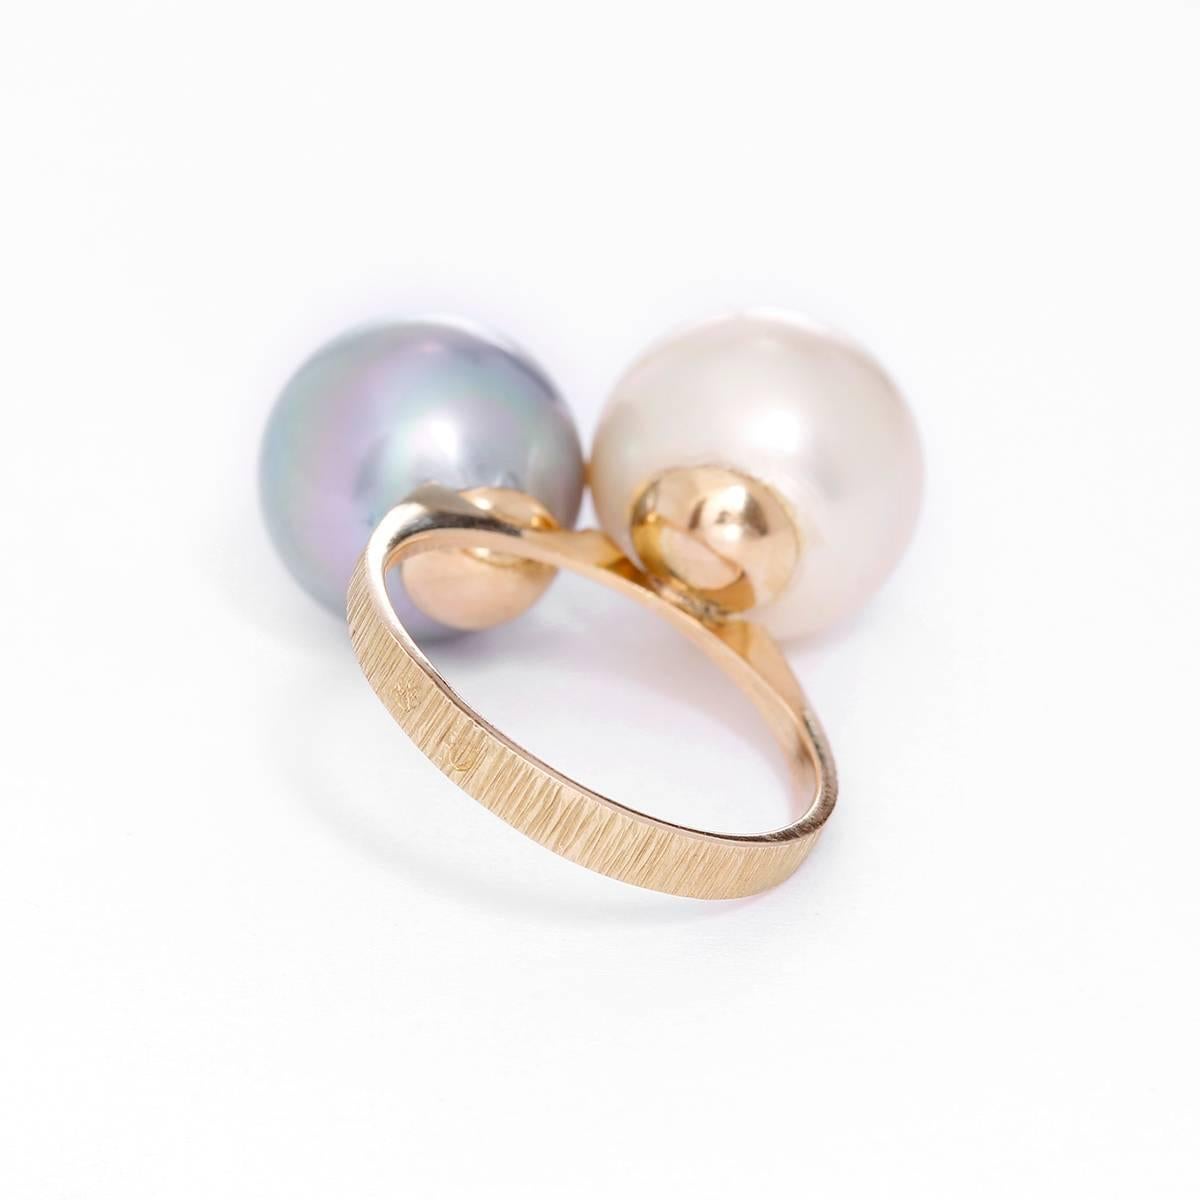 Women's Lovely Yellow Gold, White and Gray Pearl Ring